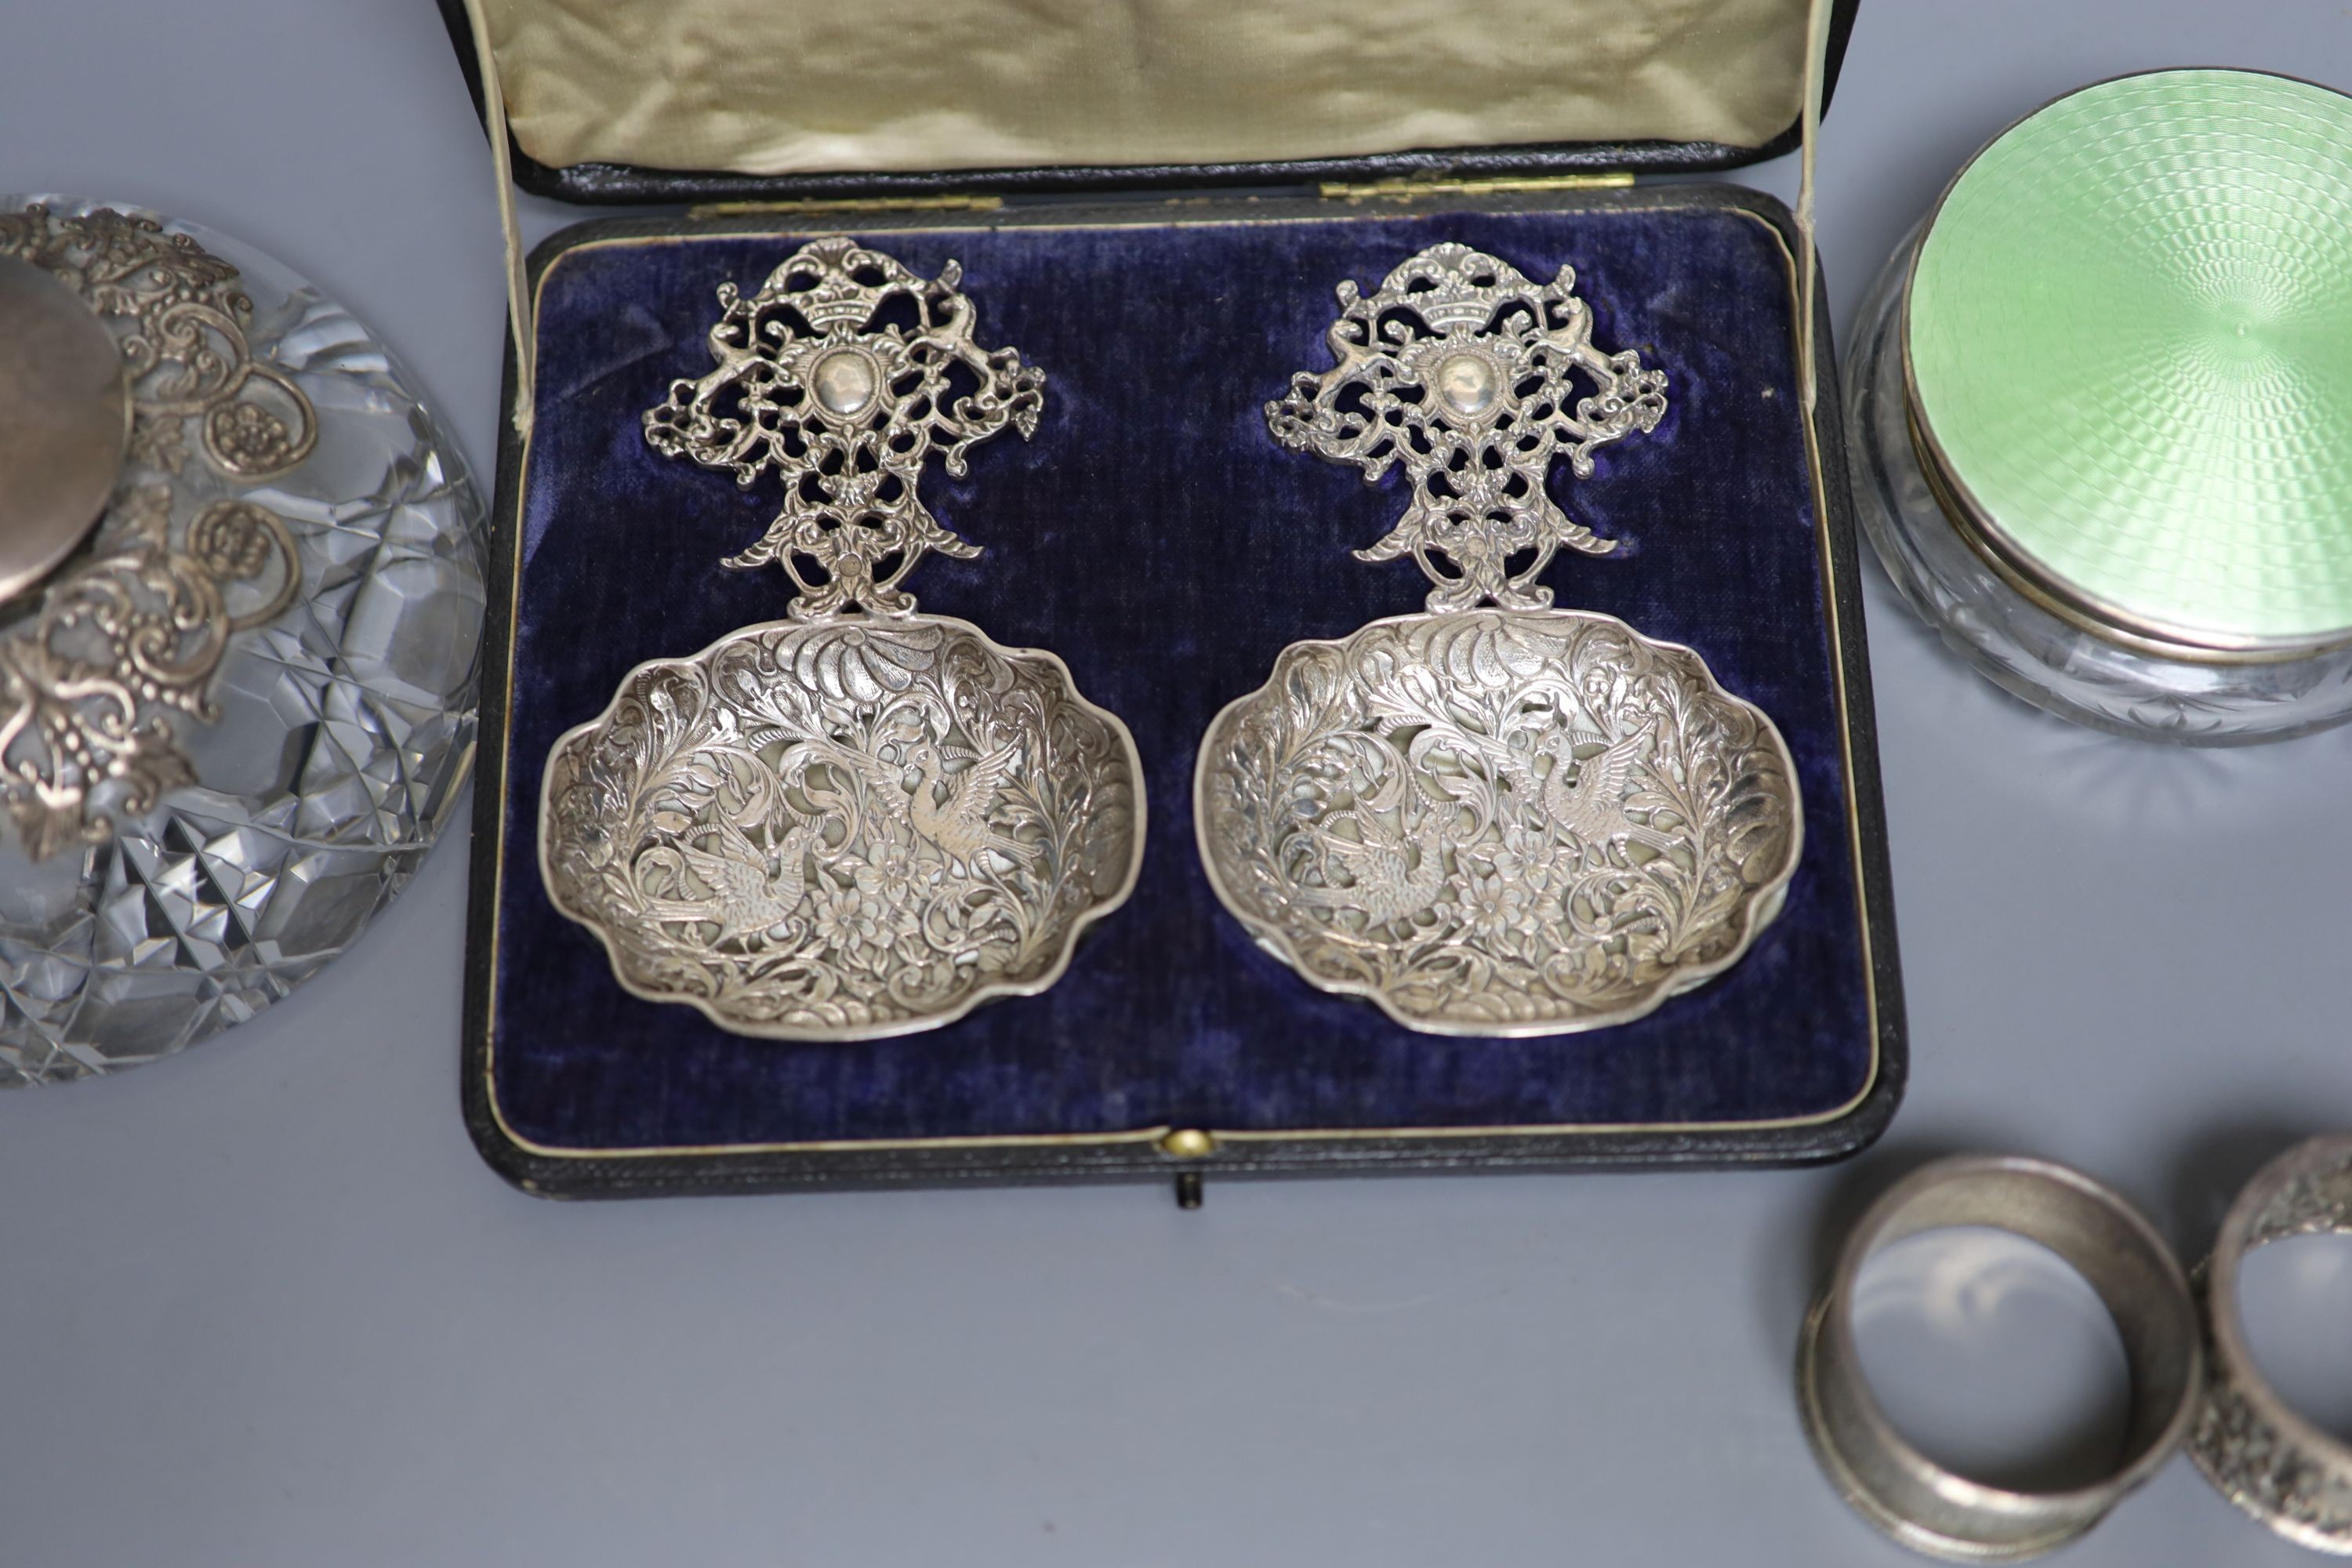 A glass silver mounted inkwell, 2 napkin rings boxed silver dishes and an enamel box - Image 3 of 6